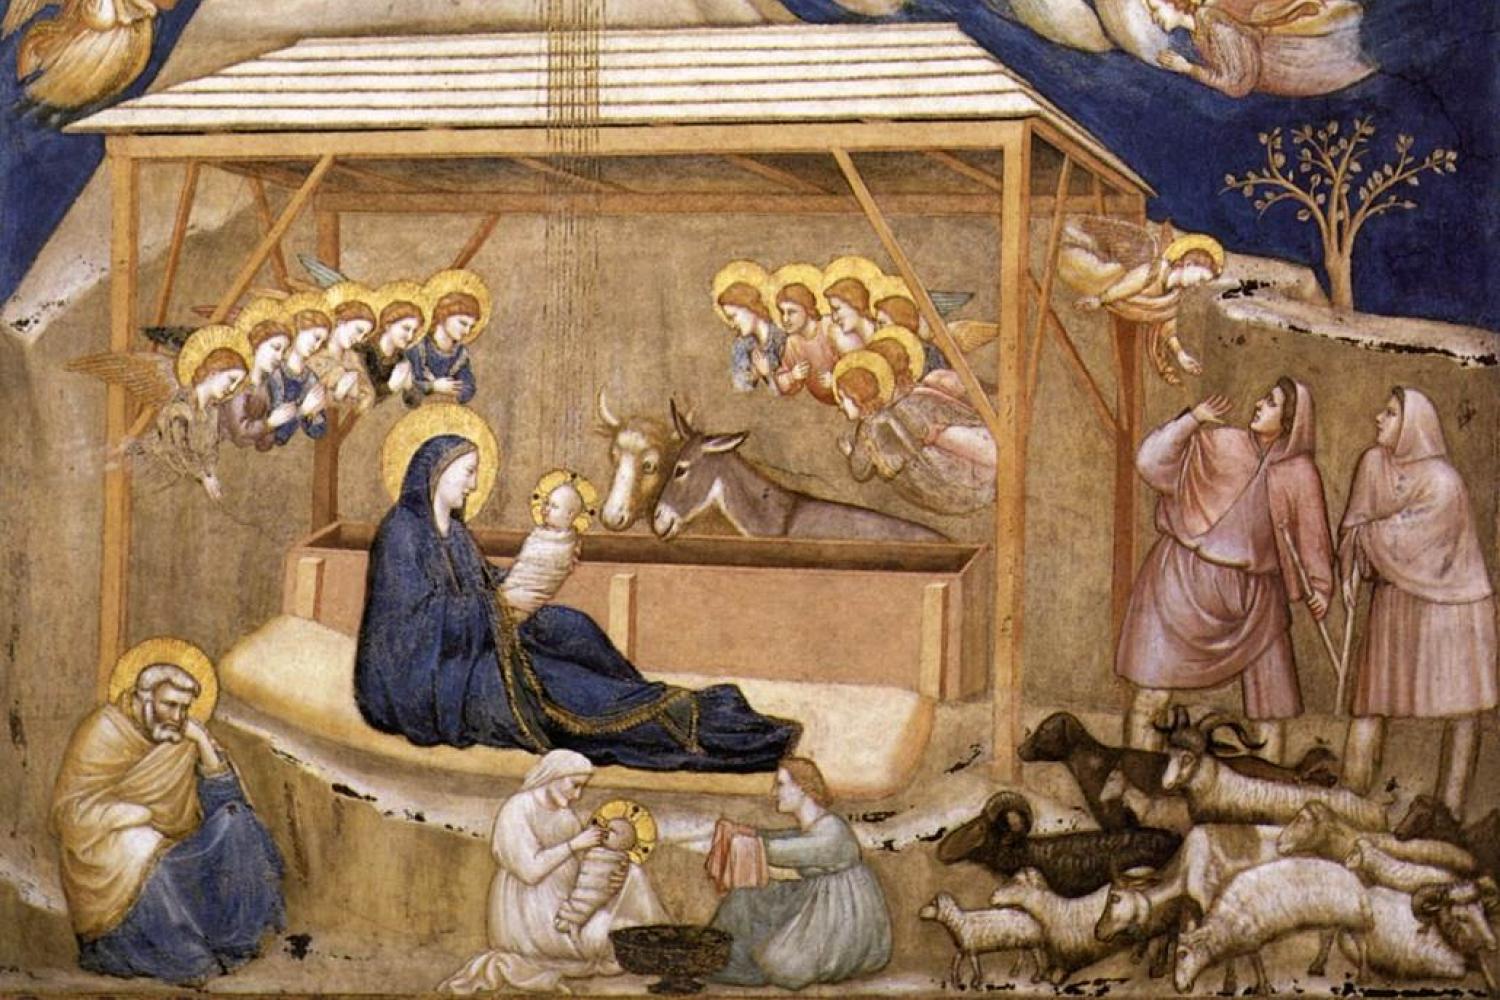 Giotto's "Nativity" from the Lower Church of the Basilica of Saint Francis in Assisi